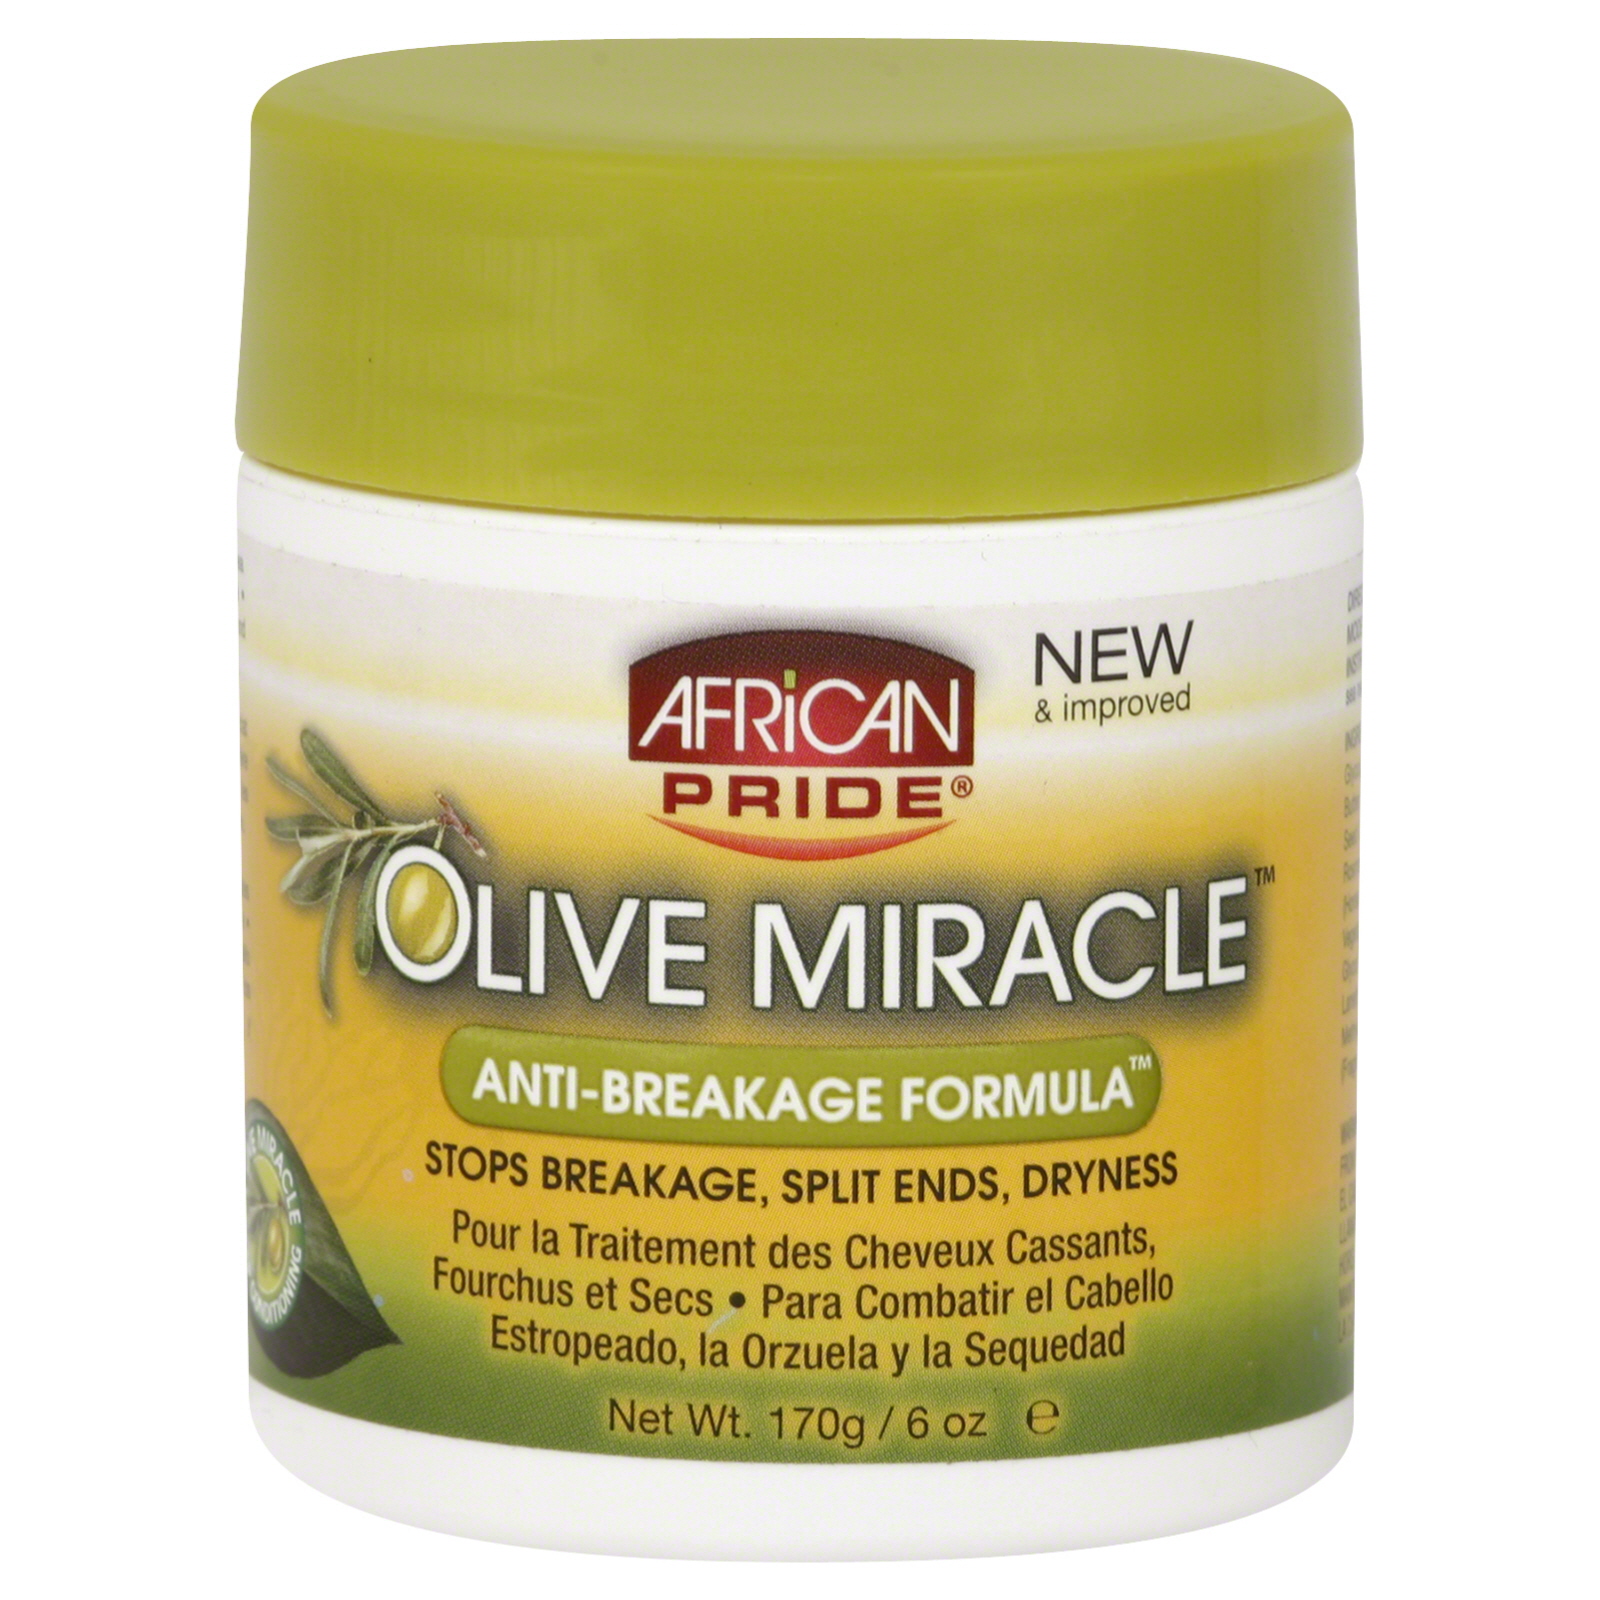 African Pride Olive Miracle Creme, 6 oz (170 g)